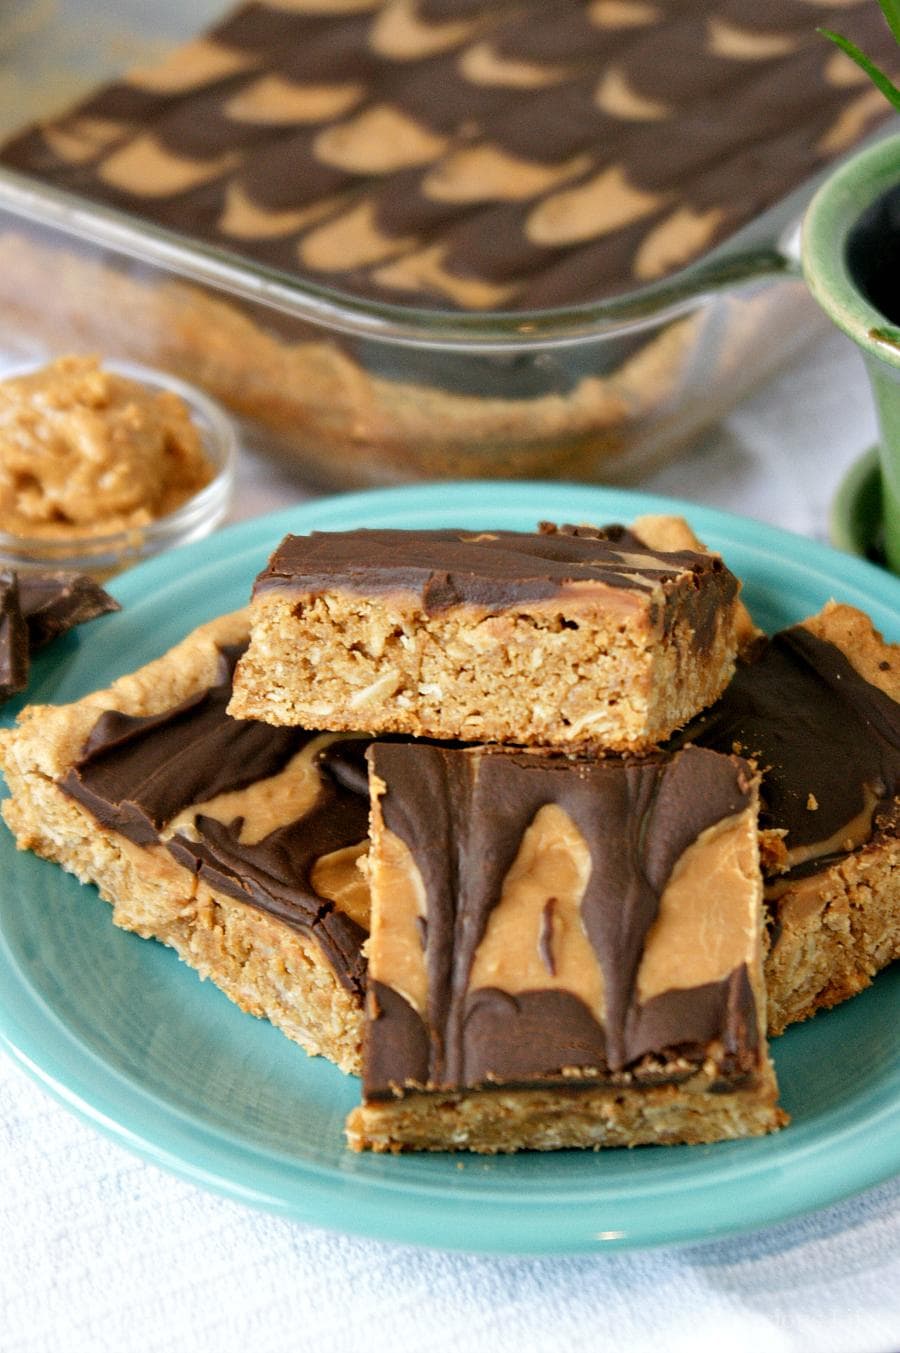 These gluten-free peanut butter bars with chocolate peanut butter frosting are a decadent treat that everyone will enjoy! They are easy to make and are a chewy and rich dessert.